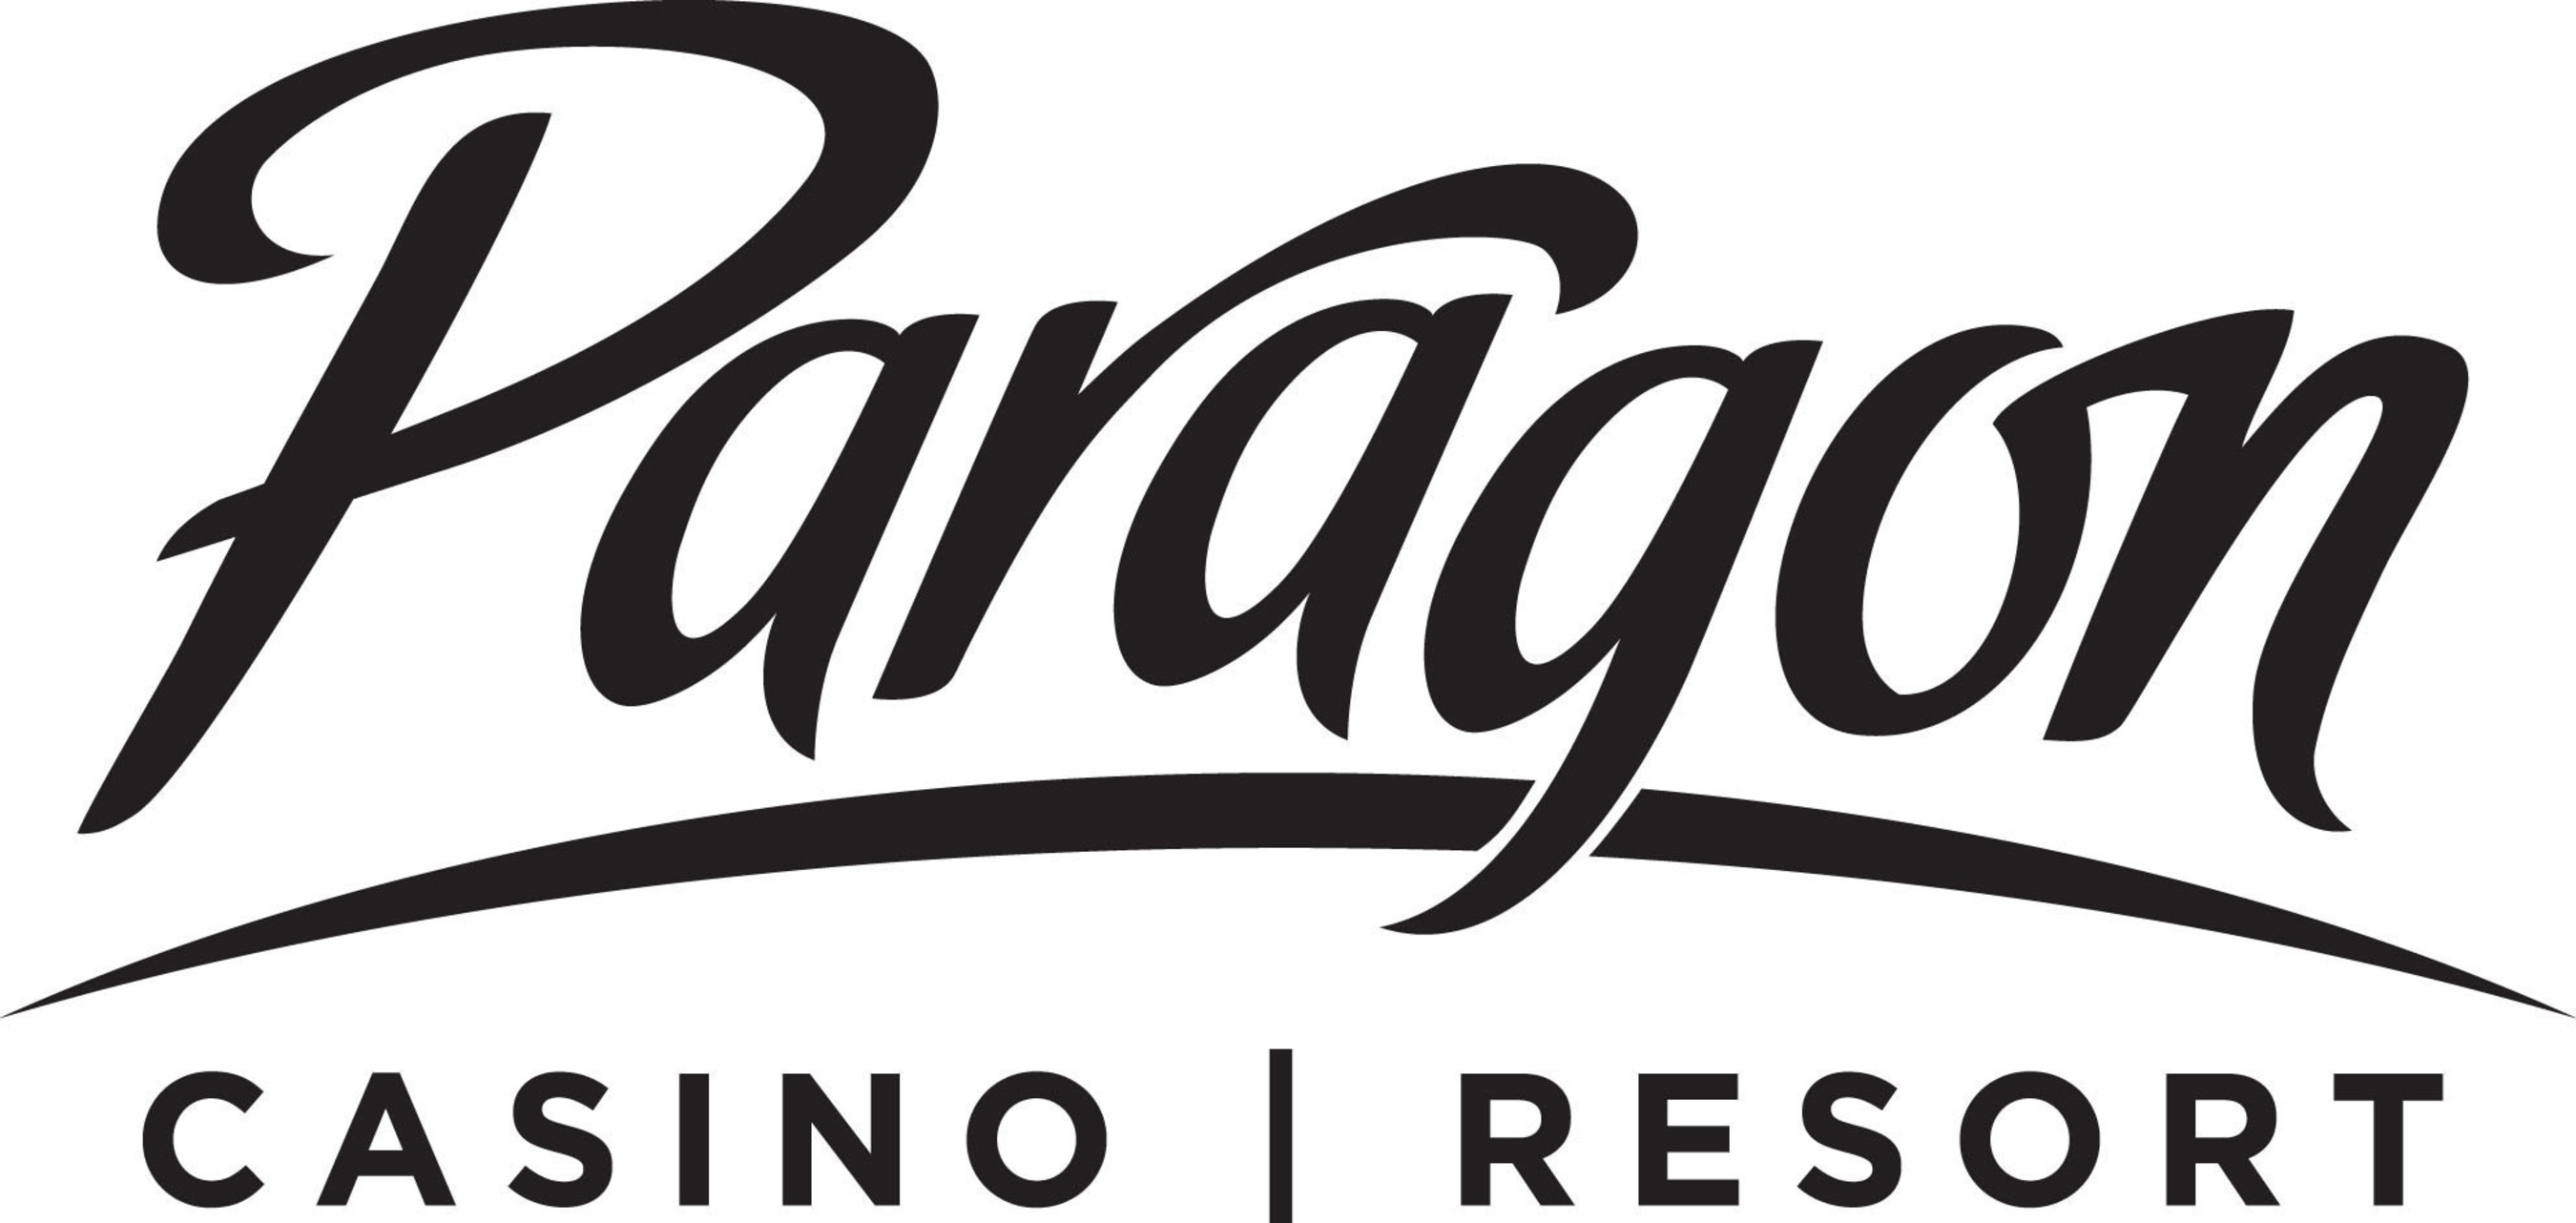 Paragon Casino Resort, in Marksville, Louisiana is owned and operated by the Tunica-Biloxi tribe of Louisiana. The Tunica-Biloxi Tribe and Paragon Casino Resort are committed to economic development in Central Louisiana and enhancing the lives of its citizens by partnering with businesses, civic organizations, and nonprofit organizations for the betterment of all.